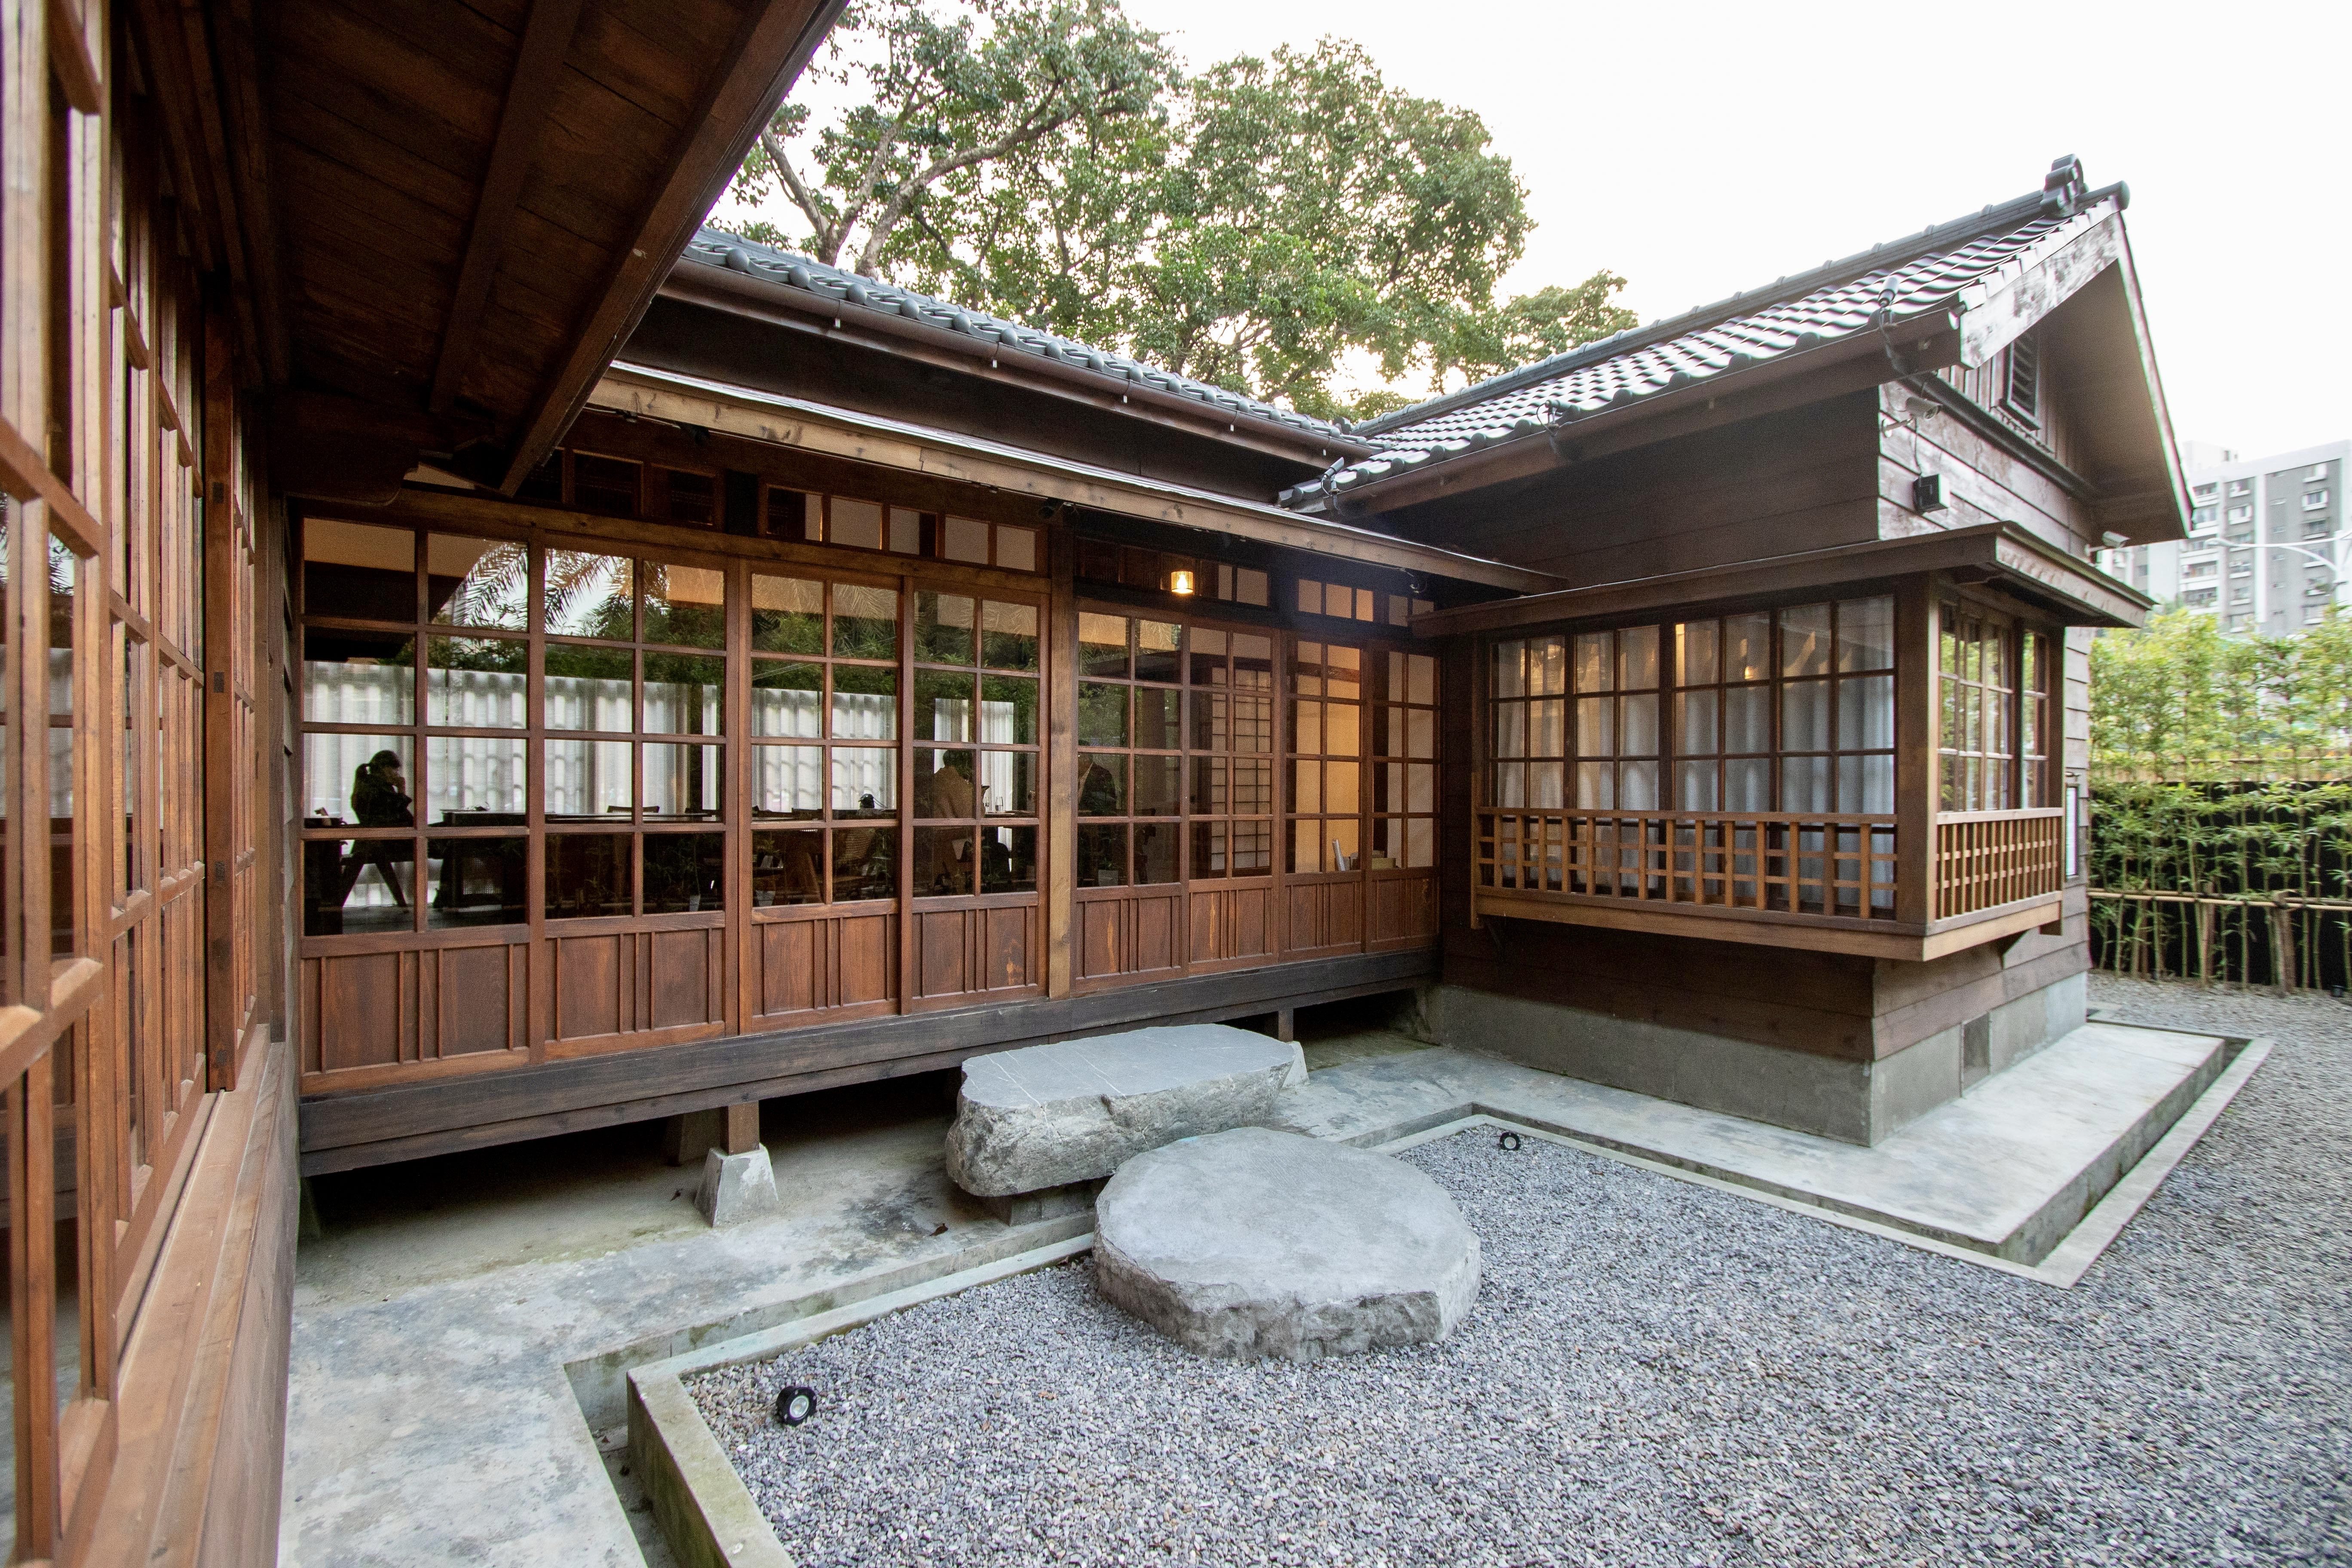 The Public can visit the renovated Japanese Colonial Era Officer Dormitory in Taipei City 